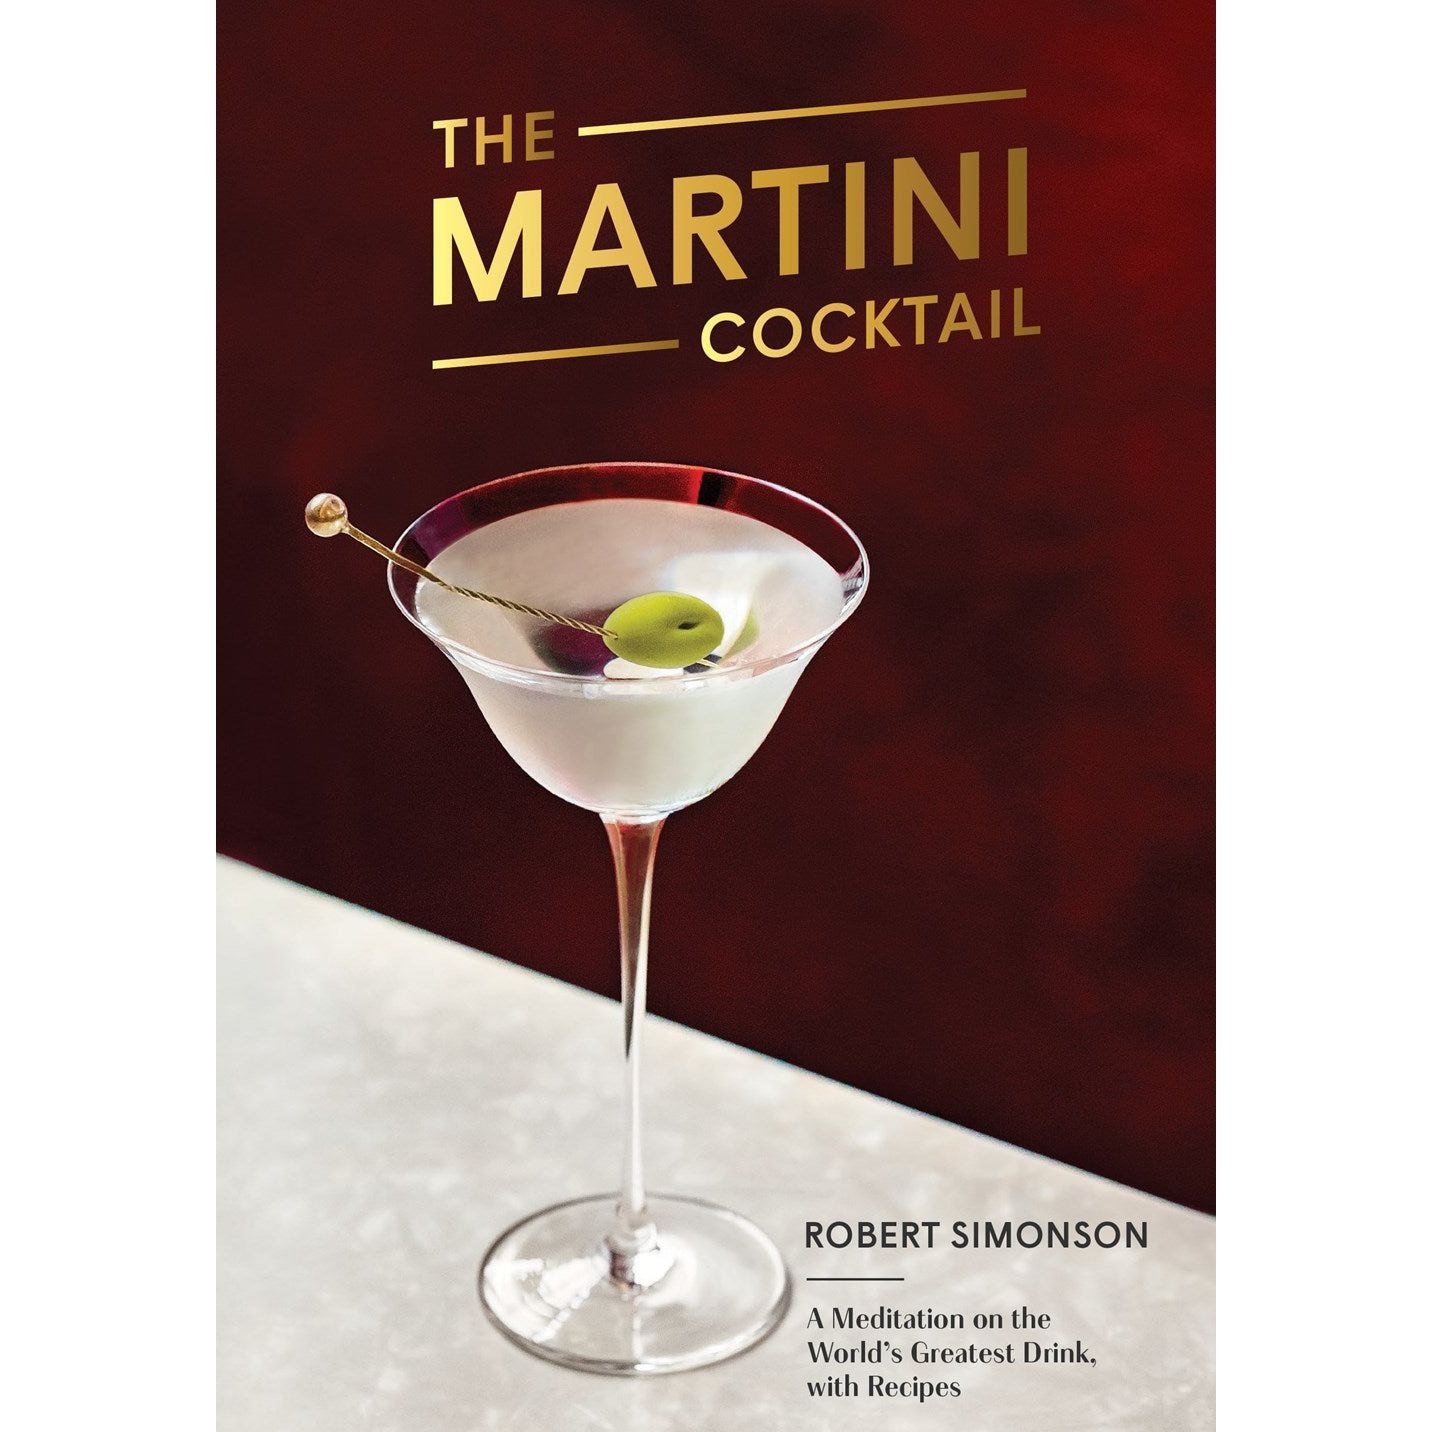 Special: The Book of Cocktail Ratios - by Michael Ruhlman